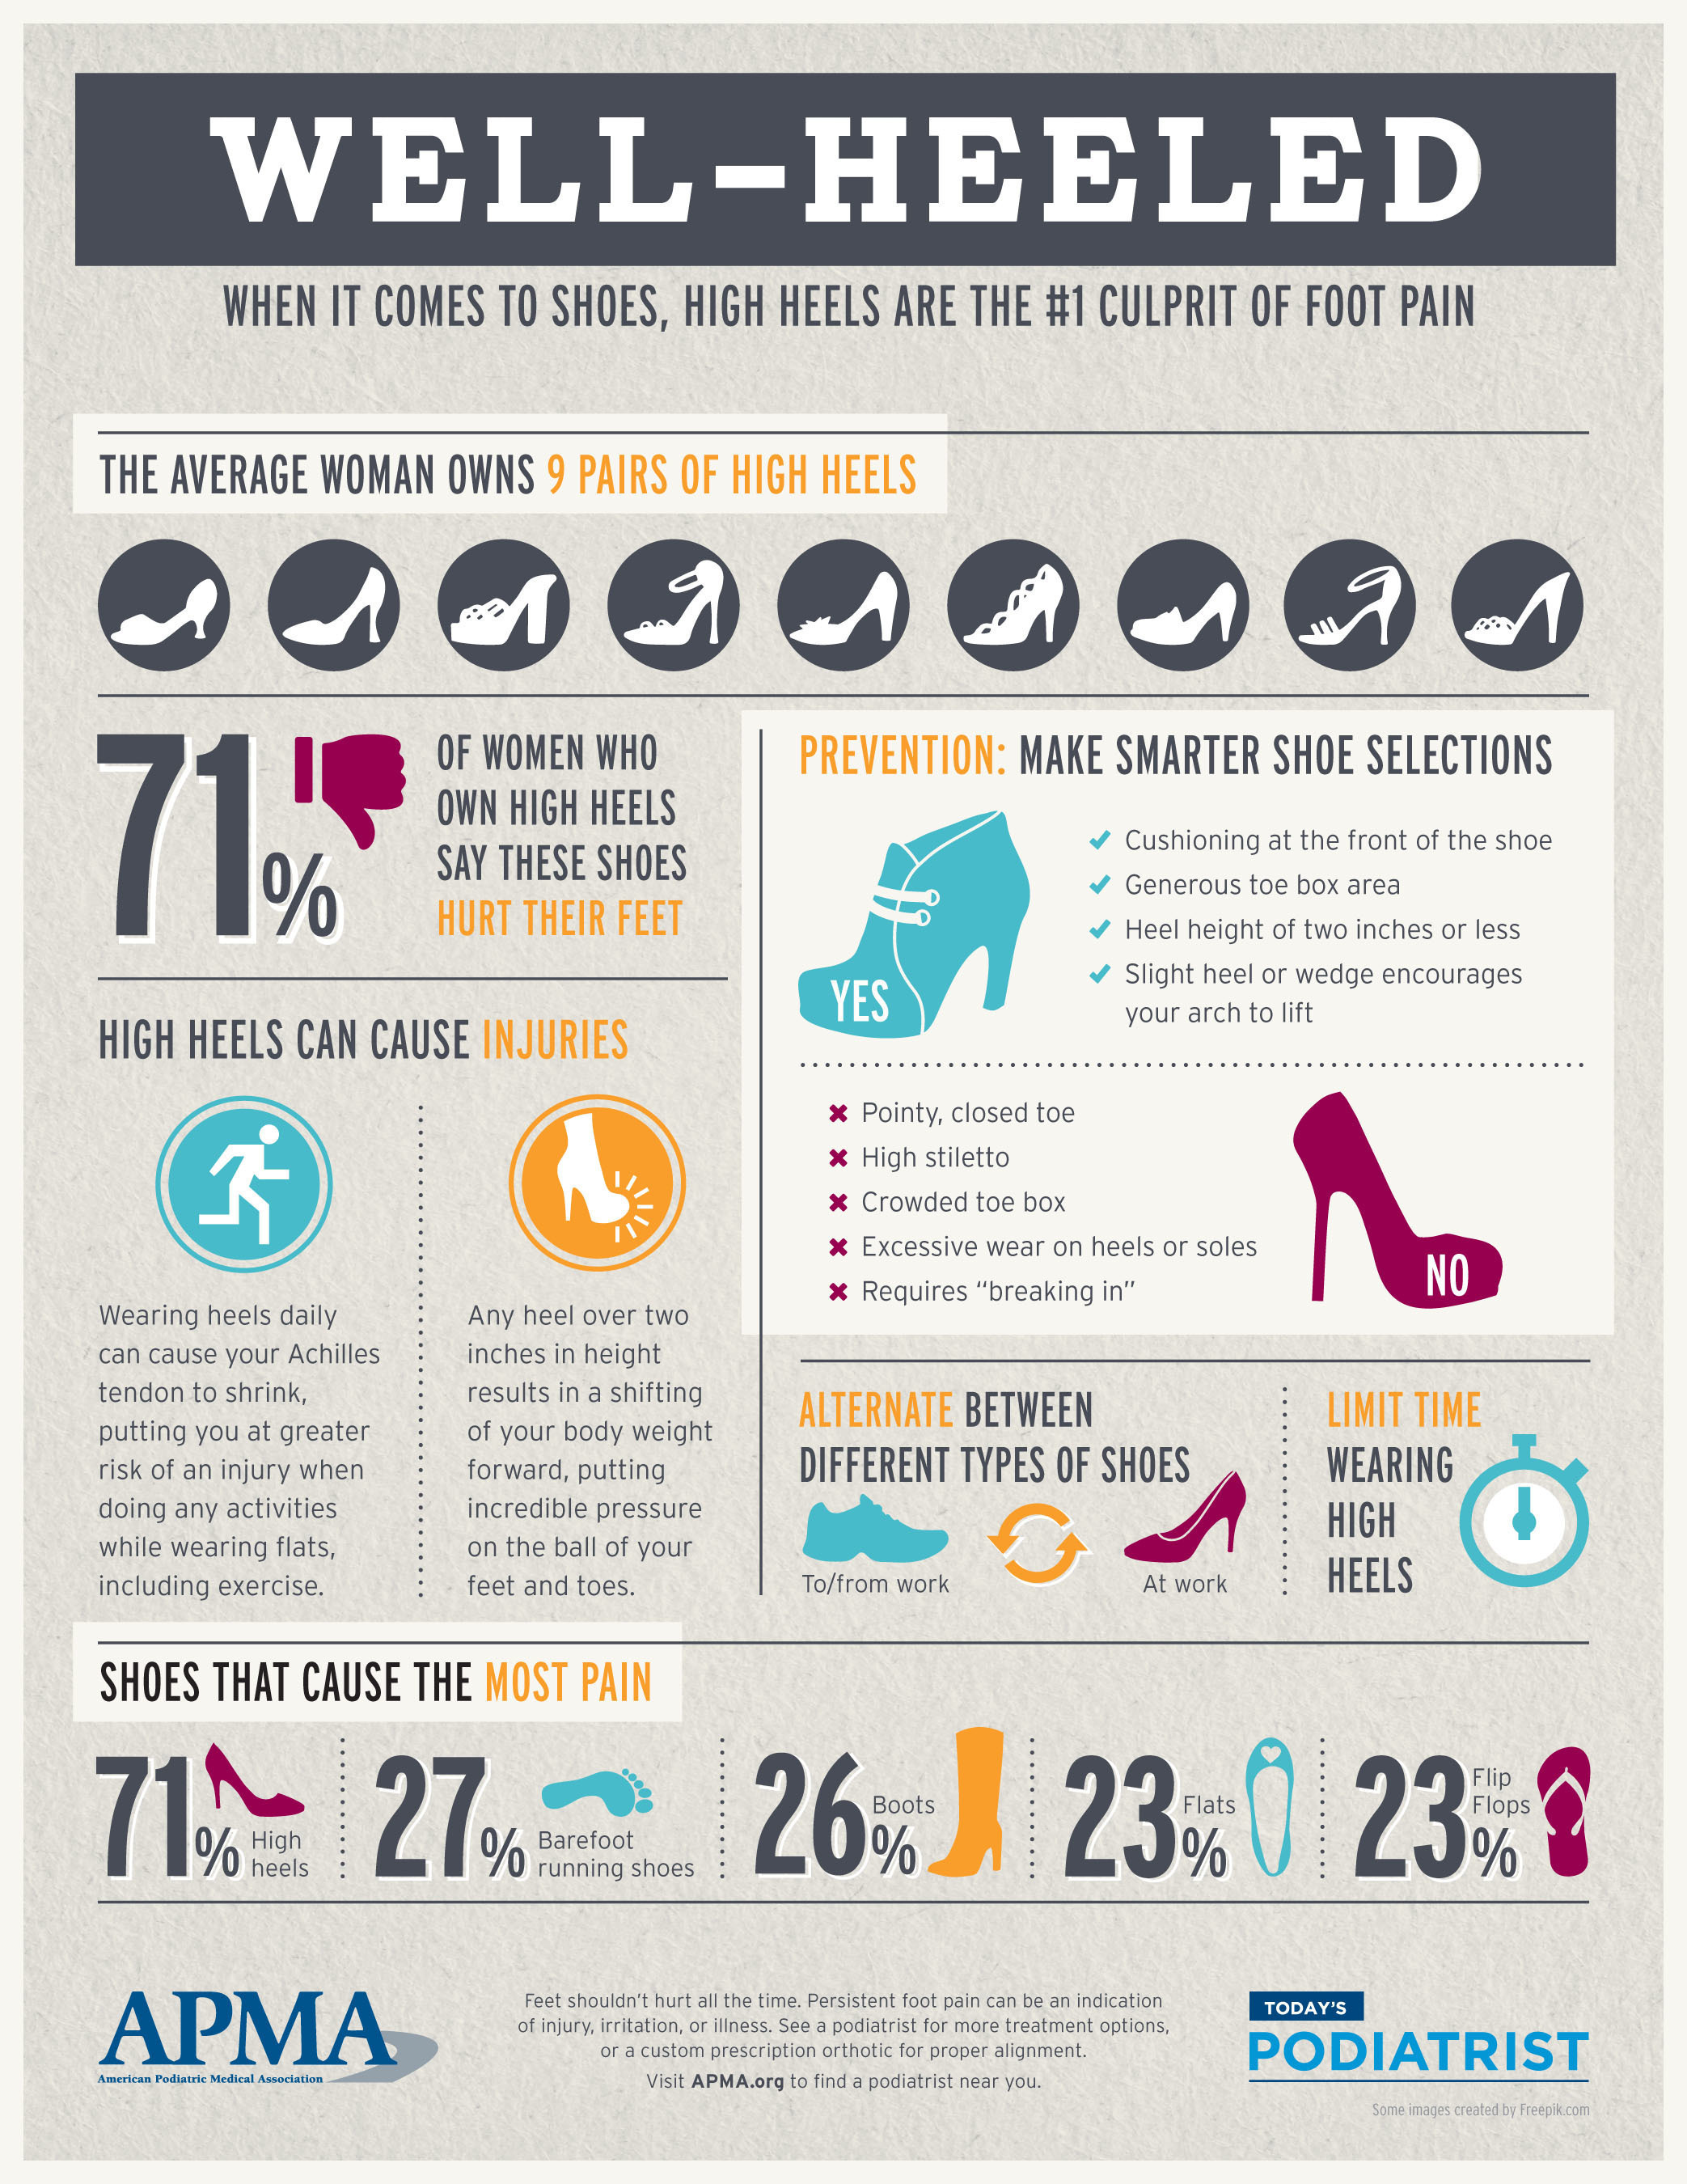 The American Podiatric Medical Association (APMA) today announced the results of its Today's Podiatrist survey, which measures the public's attitudes toward foot health. The study, which surveyed 1,000 US adults ages 18 and older, revealed that nearly half of all women (49 percent) wear high heels, even though the majority of heel wearers (71 percent) complain these shoes hurt their feet. (PRNewsFoto/American Podiatric Medical Assoc) (PRNewsFoto/American Podiatric Medical Assoc)